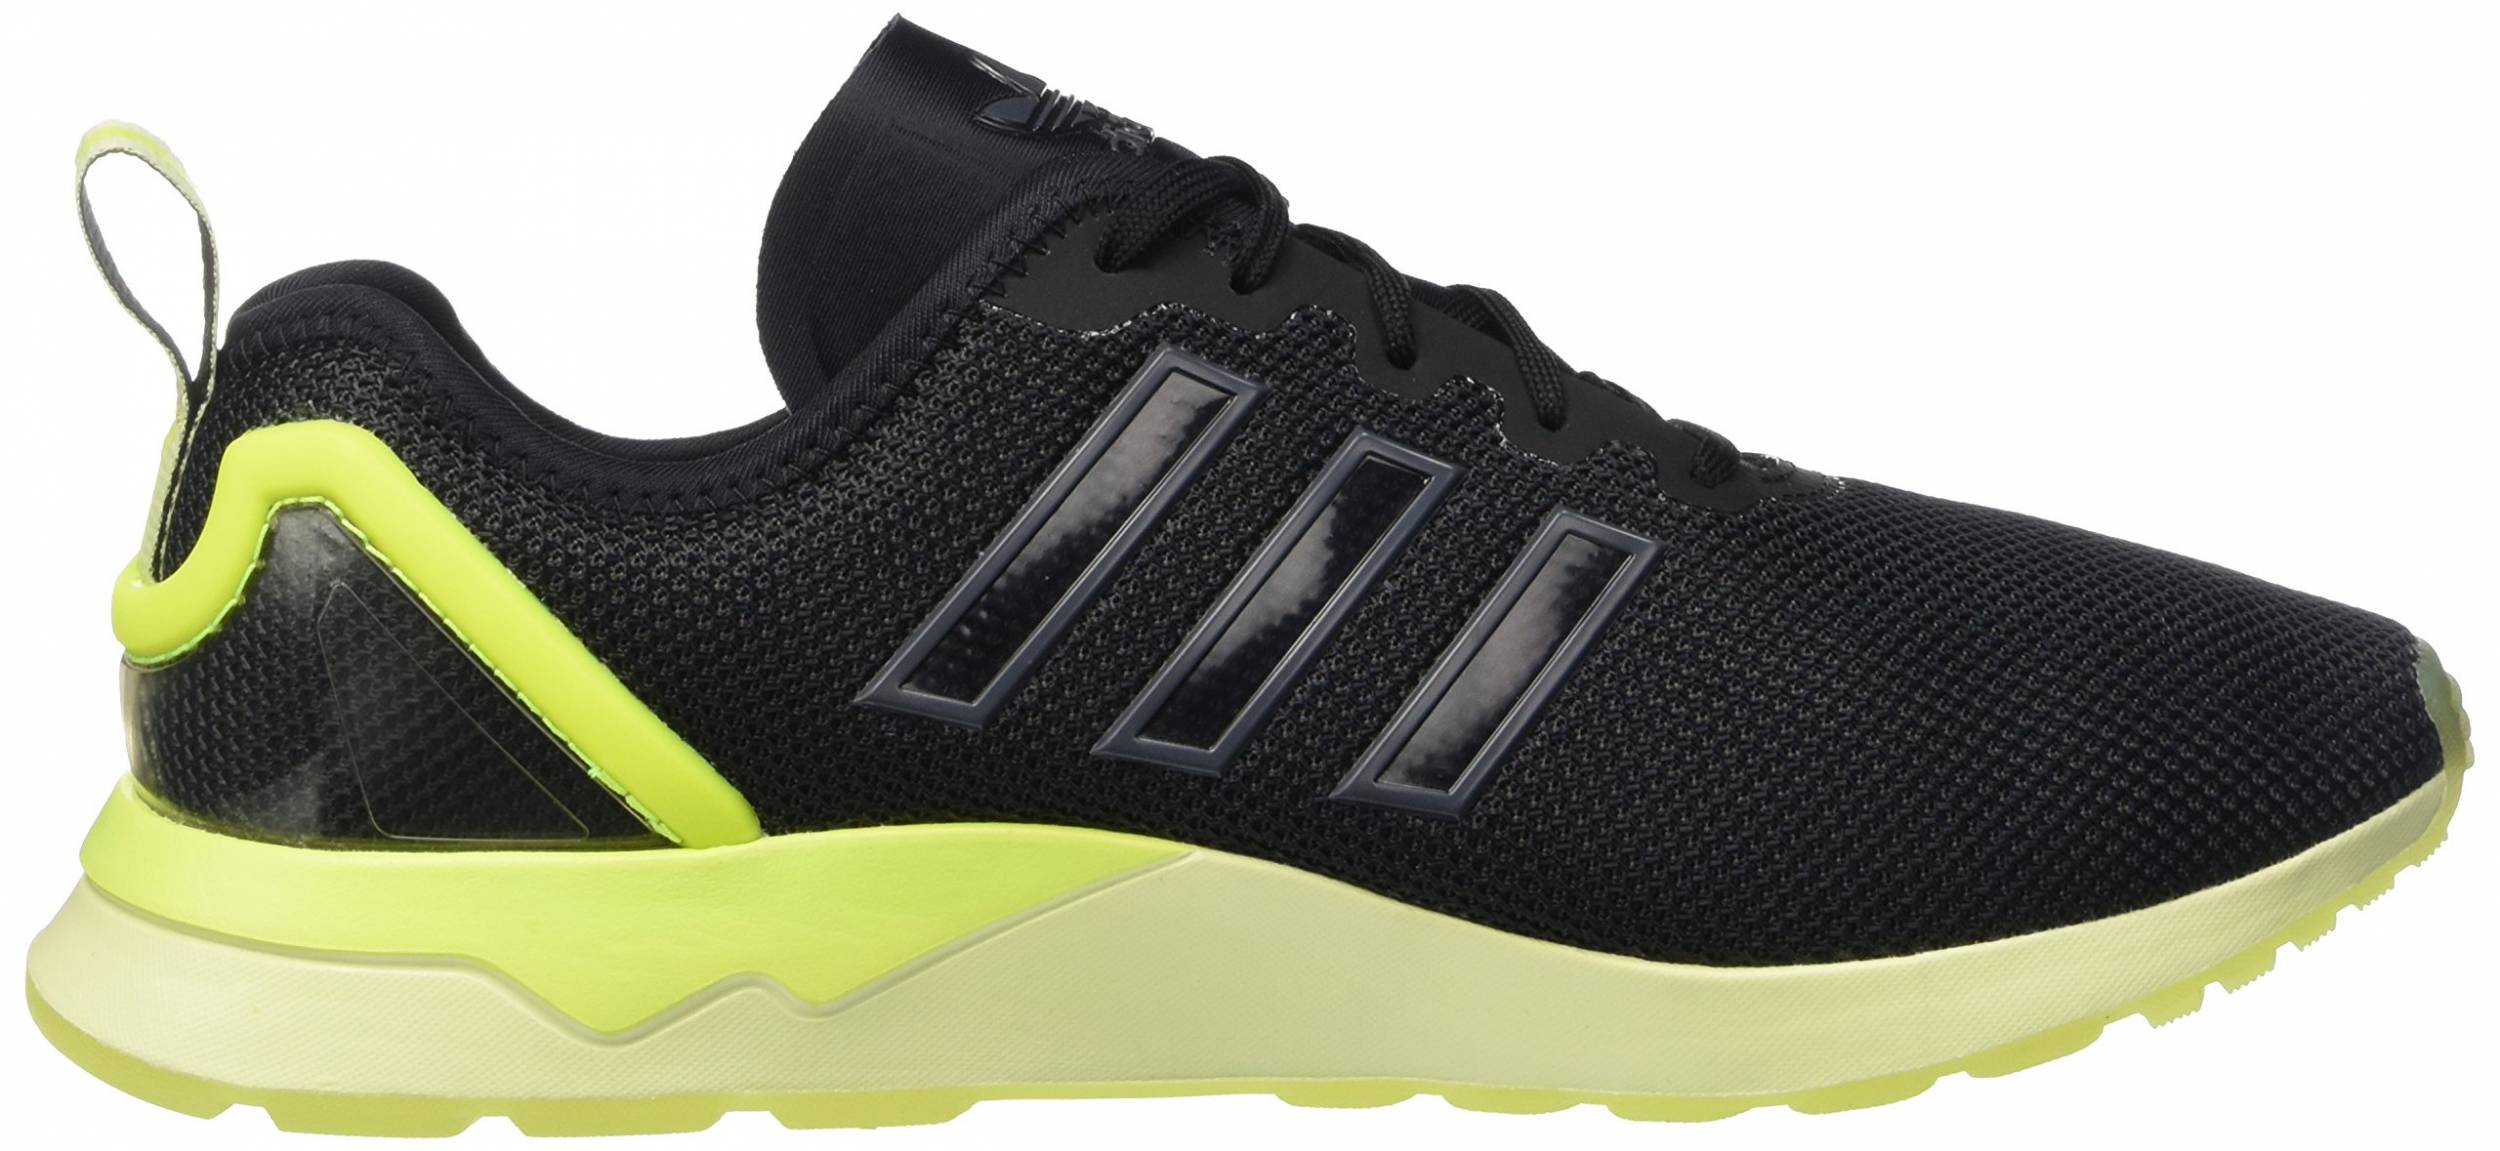 Adidas ZX Flux ADV sneakers in 5 colors (only £31) | RunRepeat